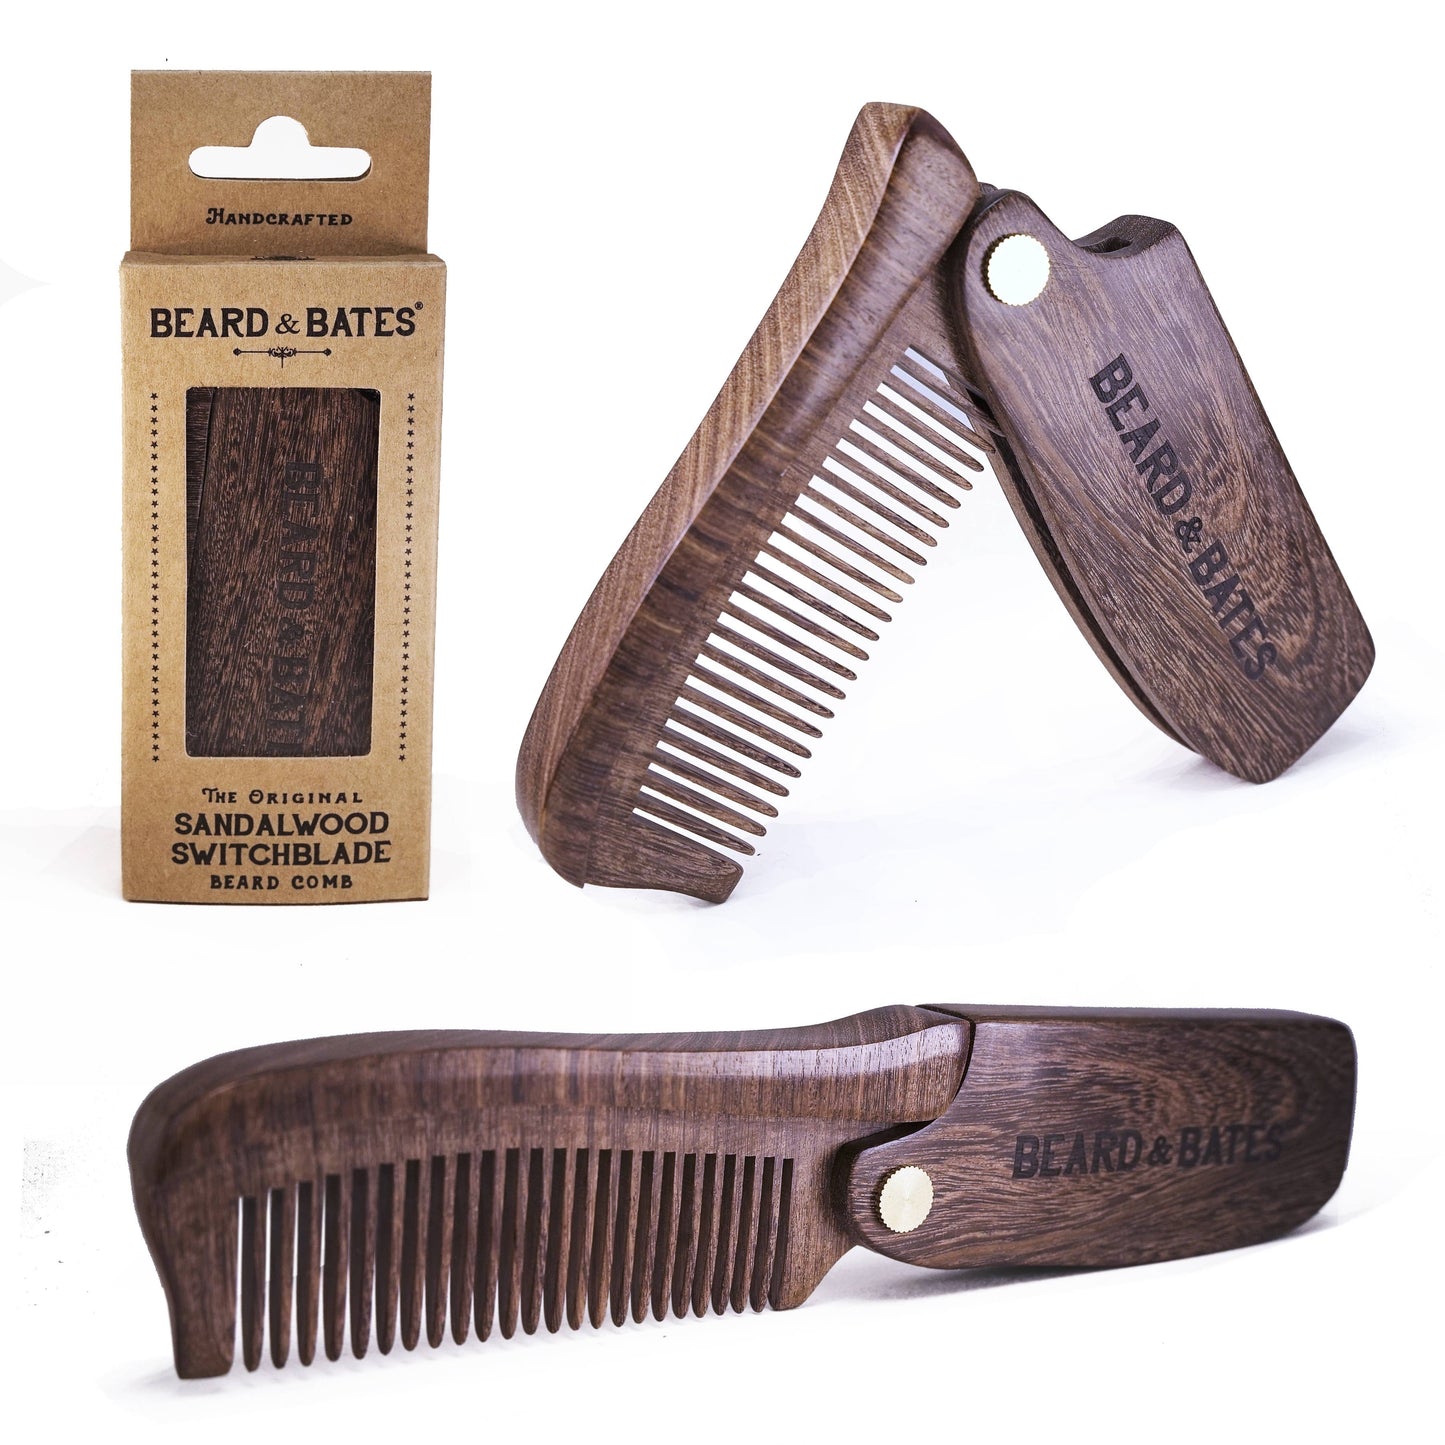 The Sandalwood Switchblade - The Original Wooden Beard Comb - FOR HIM